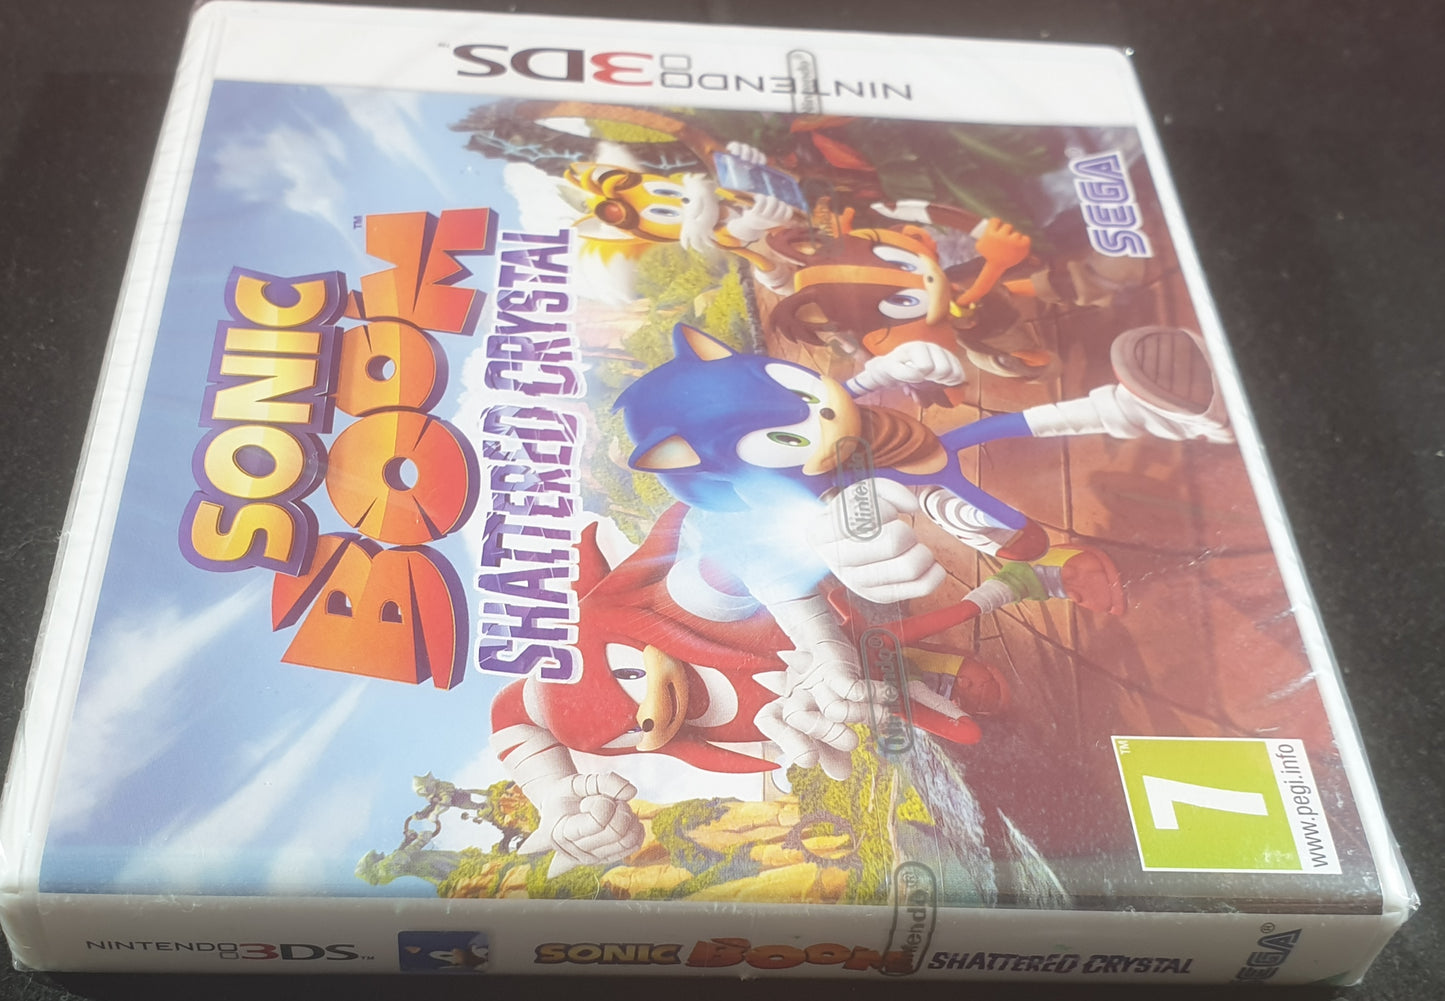 Brand New and Sealed Sonic Boom Shattered Crystal Nintendo 3DS Game